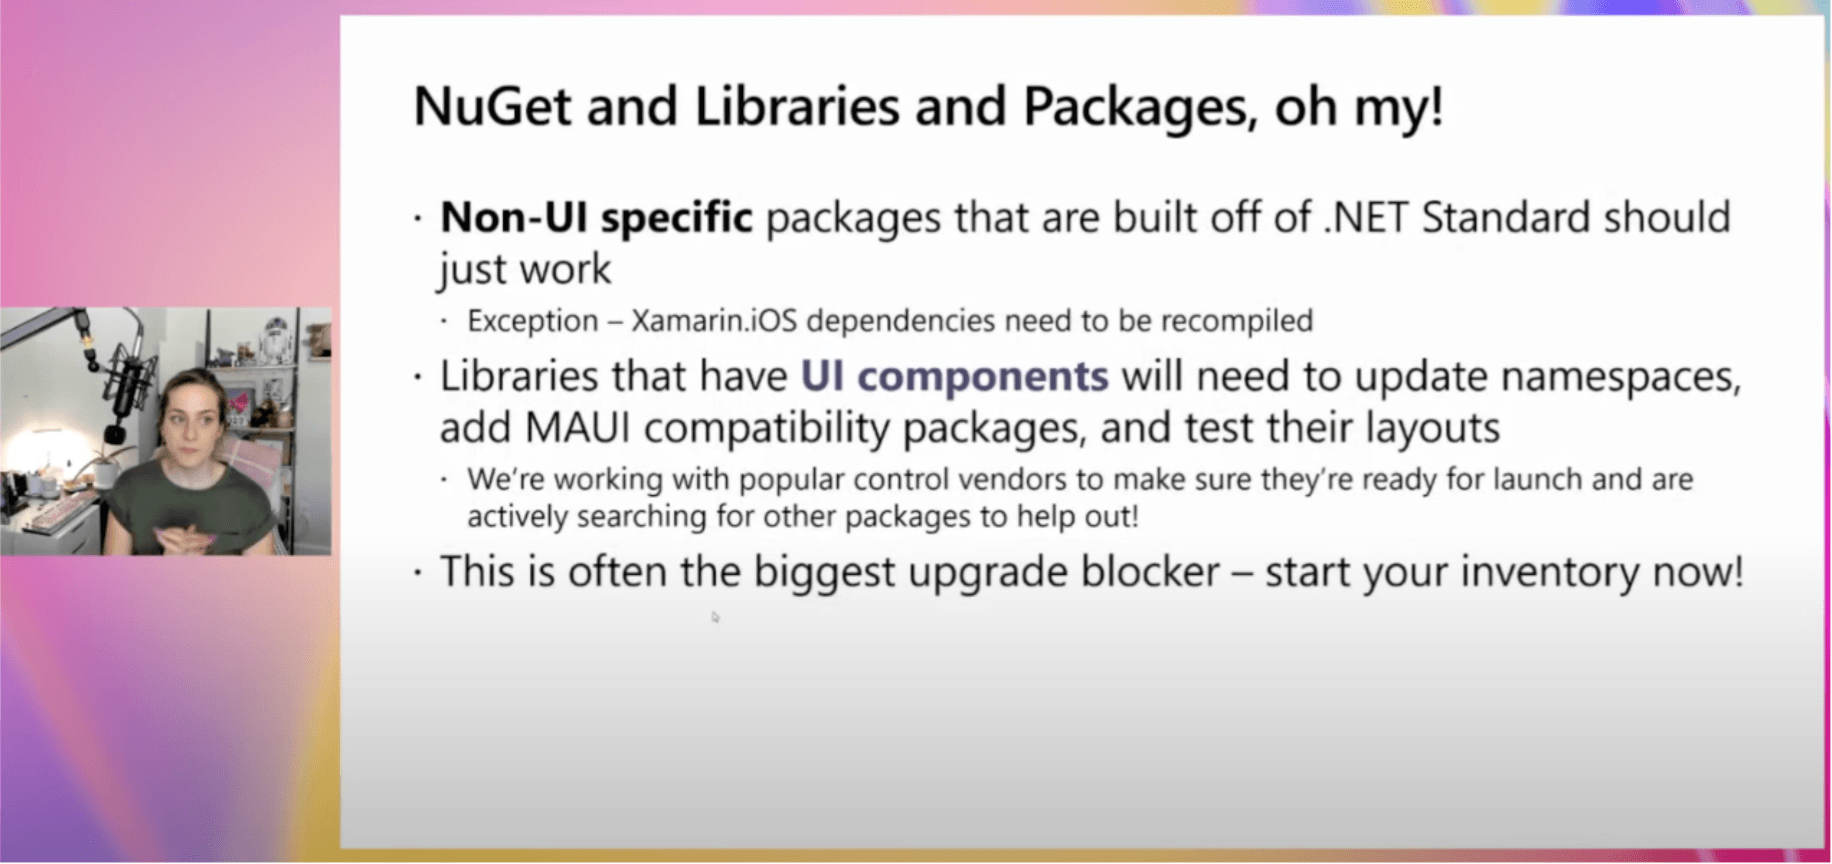 Nuget and libraries and packages oh my! Non-UI specific packages that are built off of .net standard should just work. Exception xamarin iOS dependencies need to be recompiled. Libraries that have UI components will need to update their namespaces, add Maui compatibility packages, and test their layouts. We're working with popular control vendors to make sure they're ready for launch and are actively searching for other packages to help out. This is often the biggest upgrade blocker. Start your inventory now.